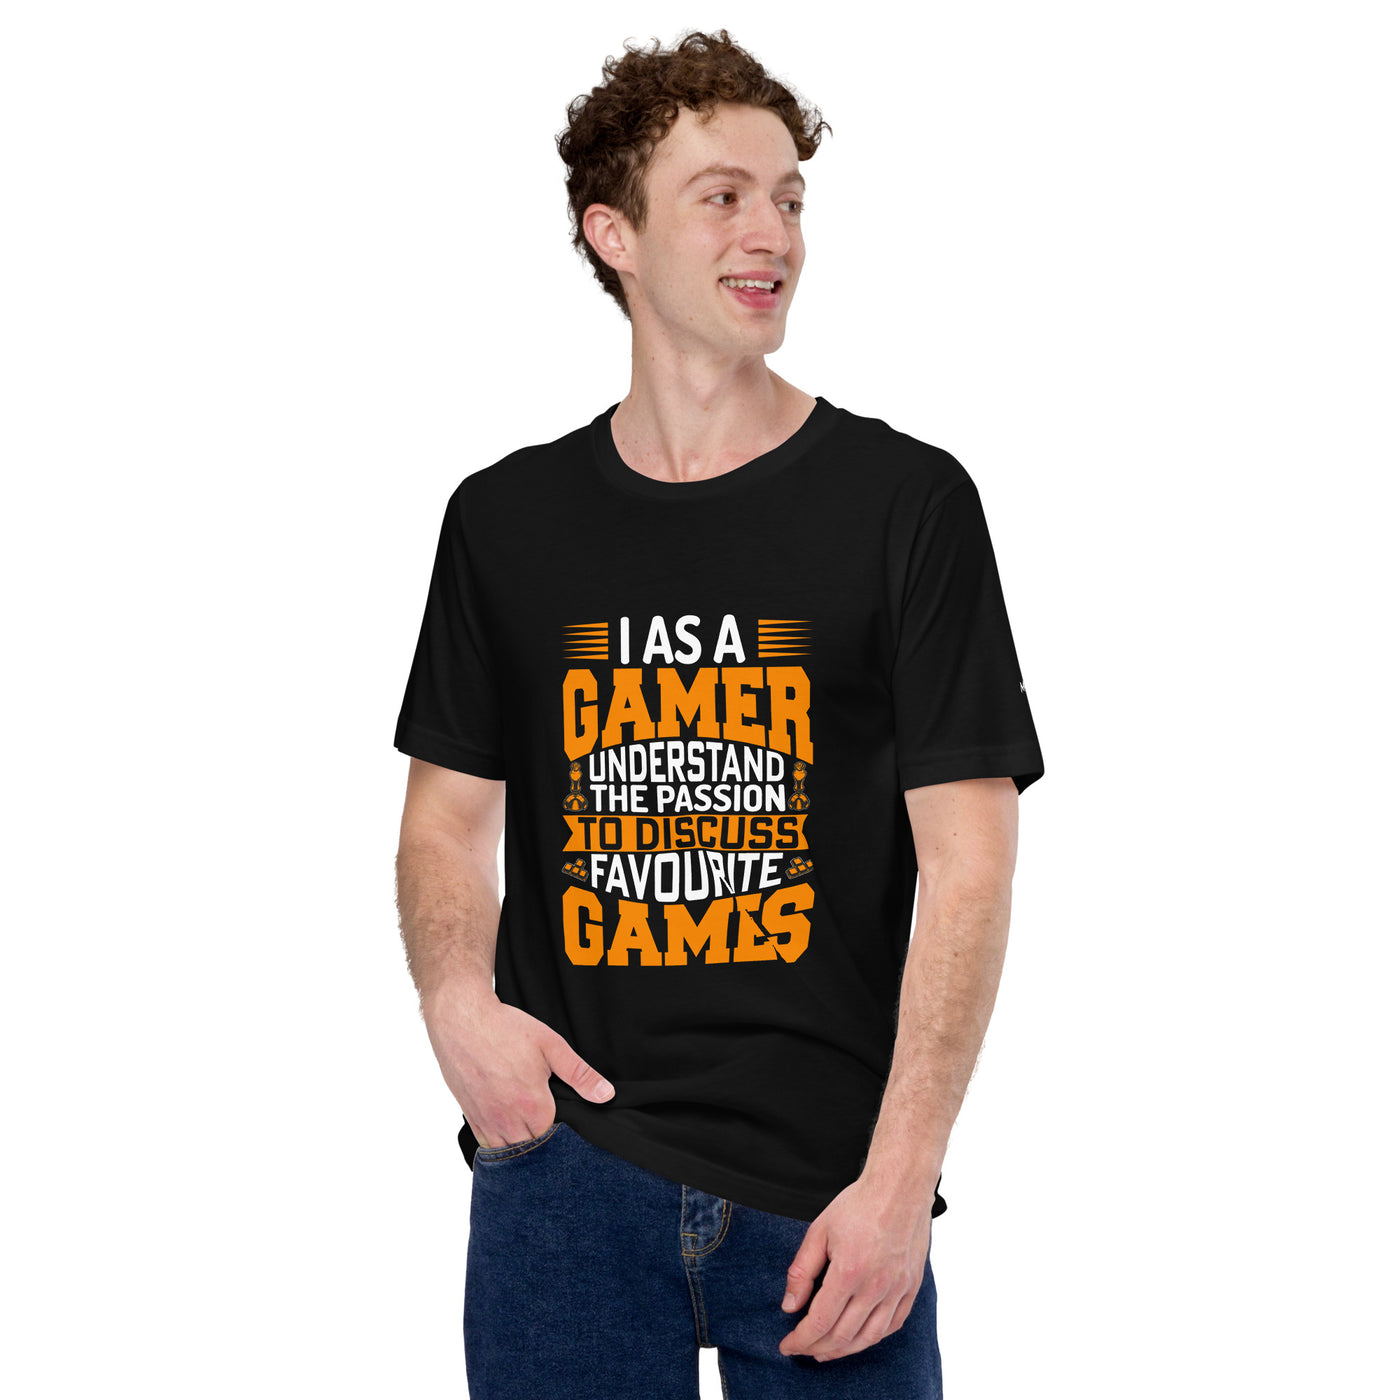 I, as a Gamer, Understand the Passion to Discuss Favorite Games - Unisex t-shirt